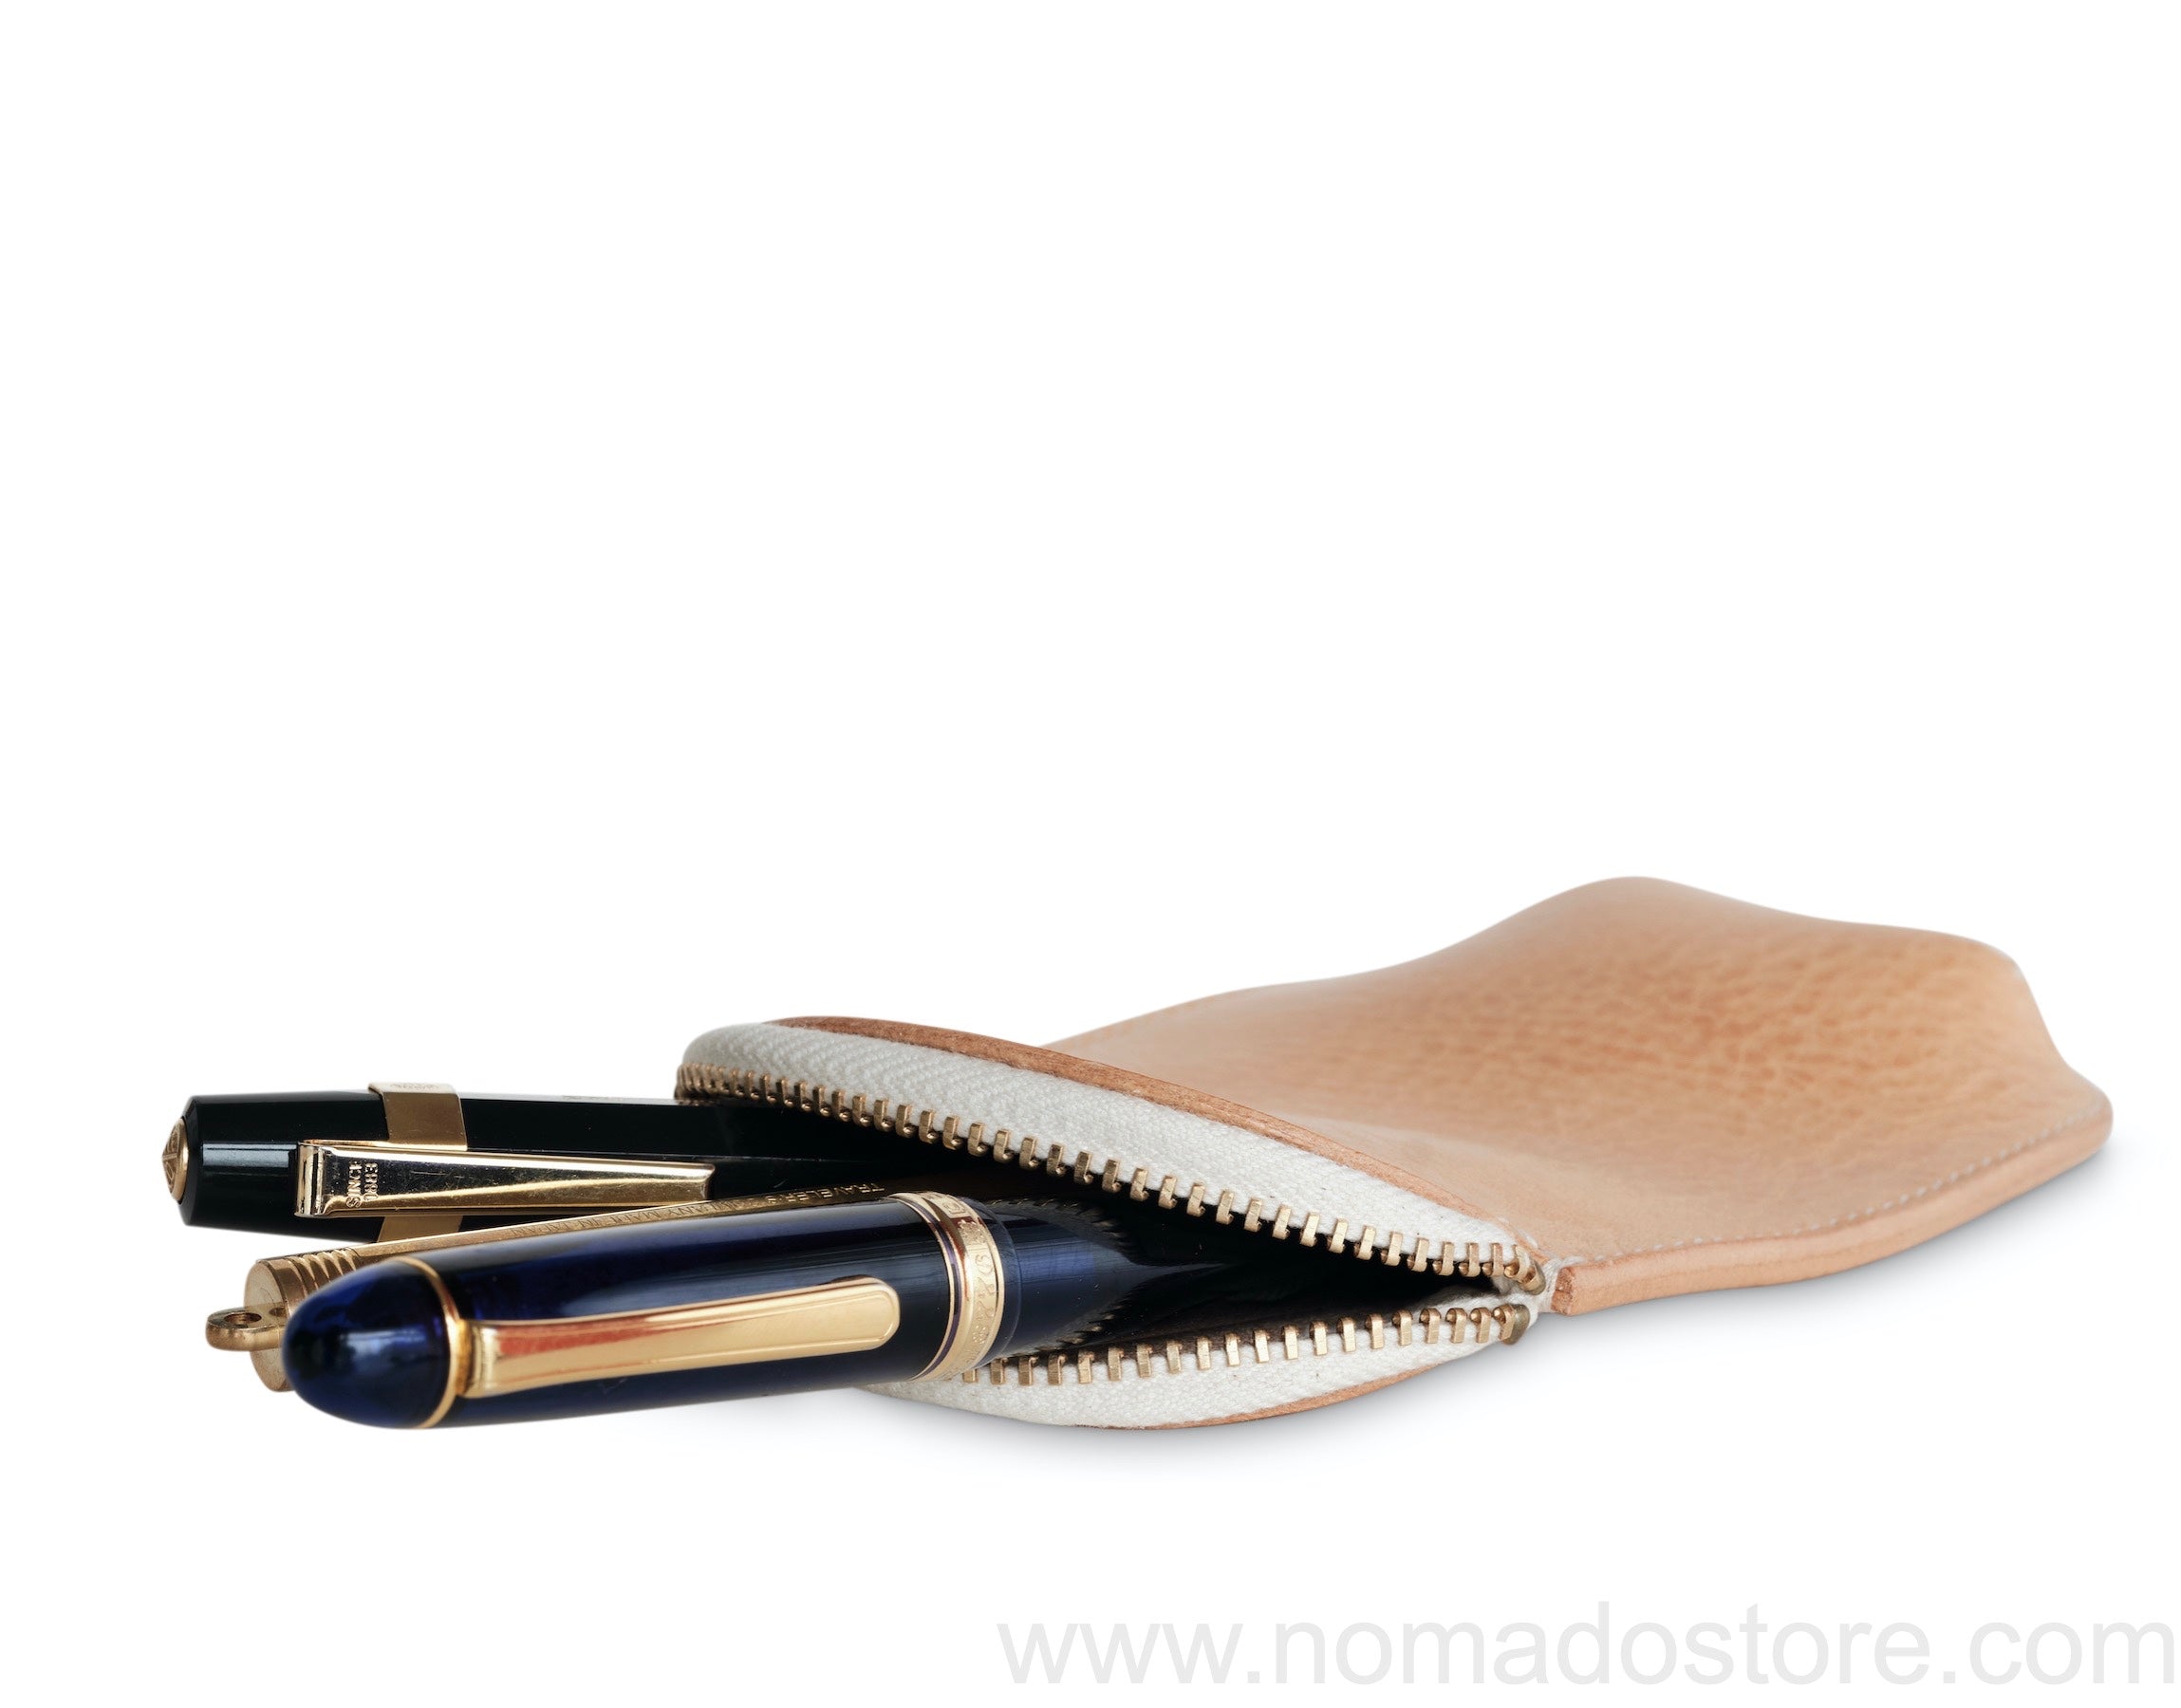 The Superior Labor Pen & Comb Holder (Japanese leather) - NOMADO Store